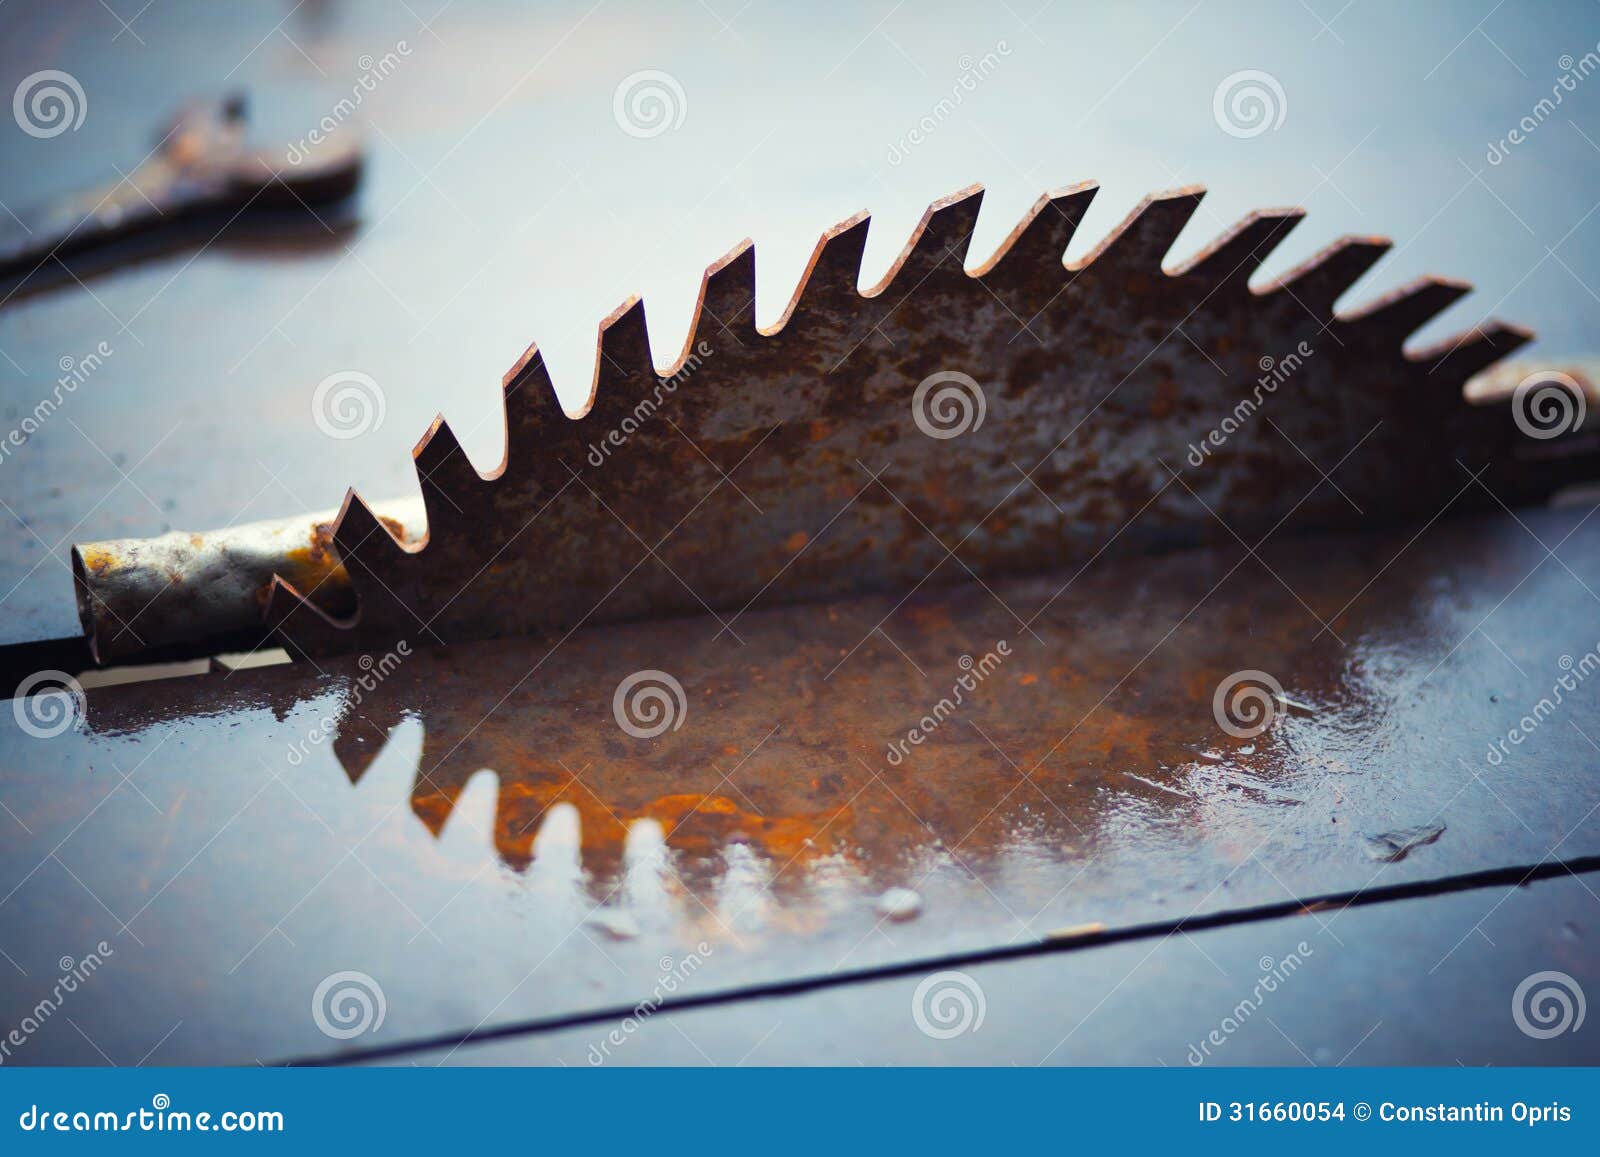 Abstract picture with reflection of a rusty sawmill blade.